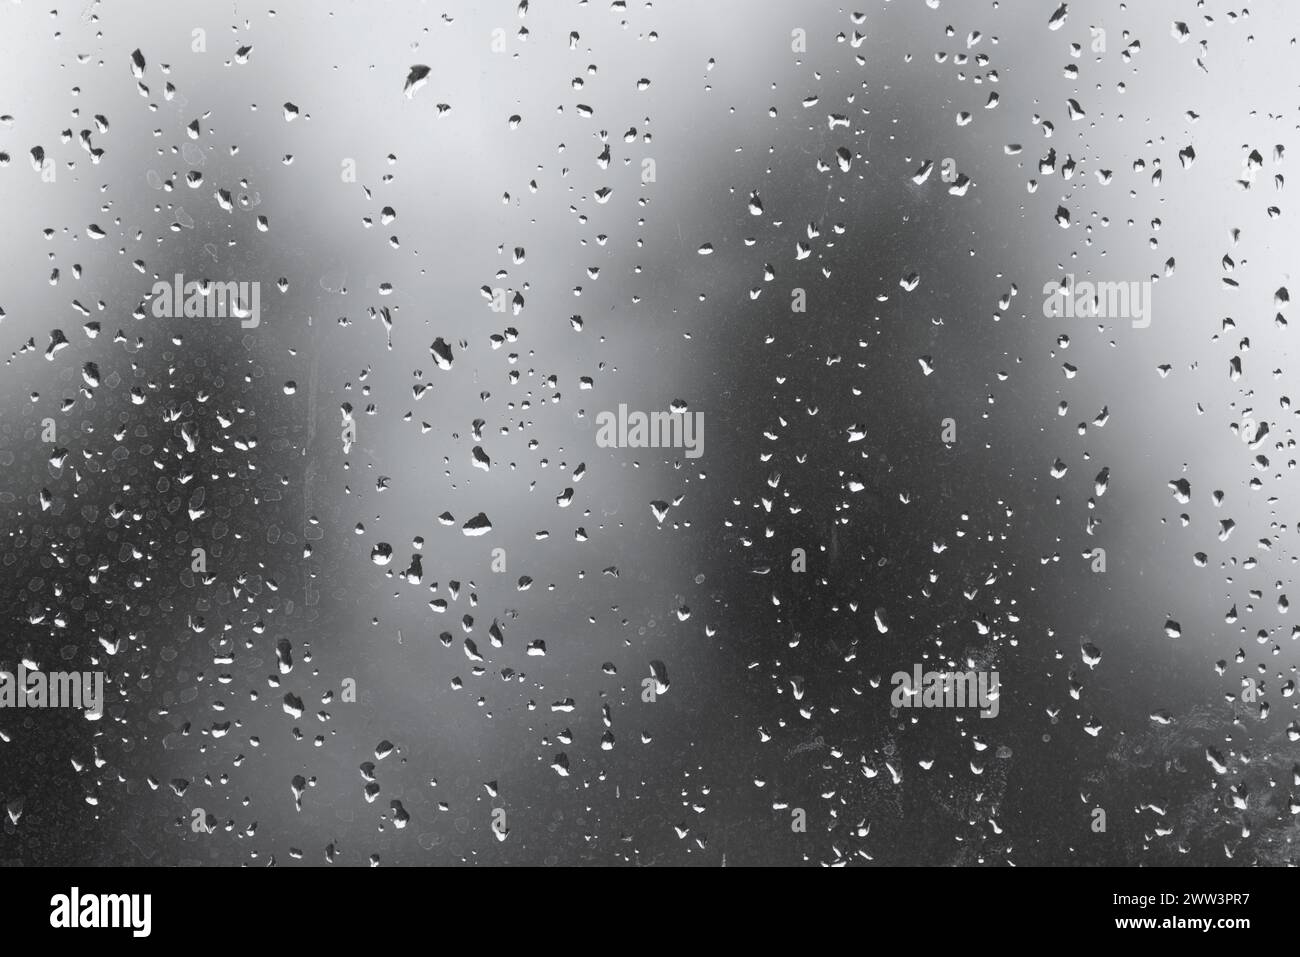 Dirty wet window glass with droplets and gray blurred environment behind, rainy photo background texture Stock Photo